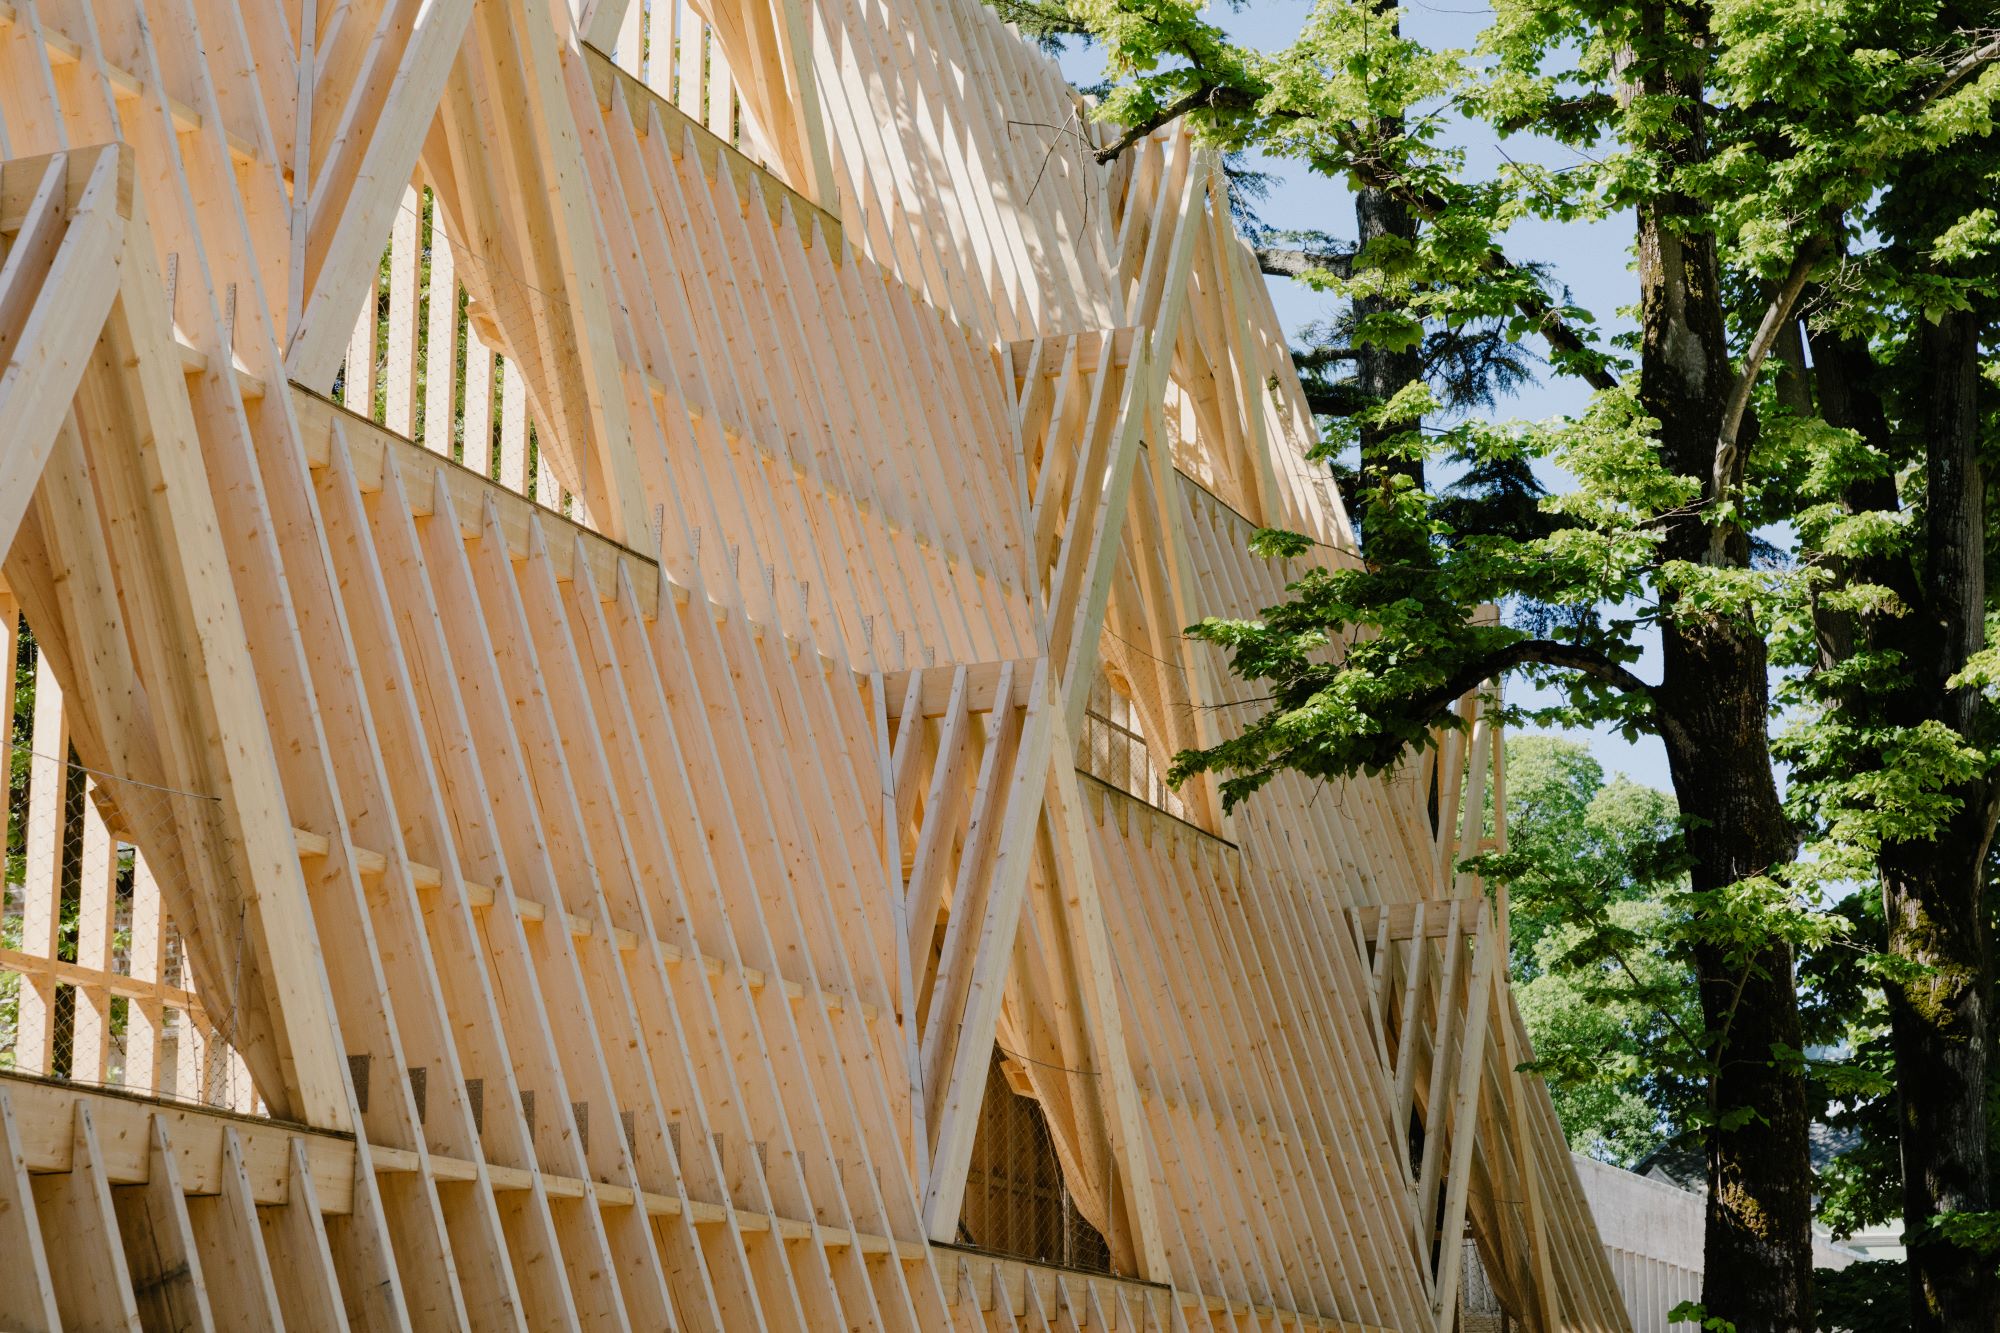 Peaked roof structure made of 2 by 4 wood with trees next to it